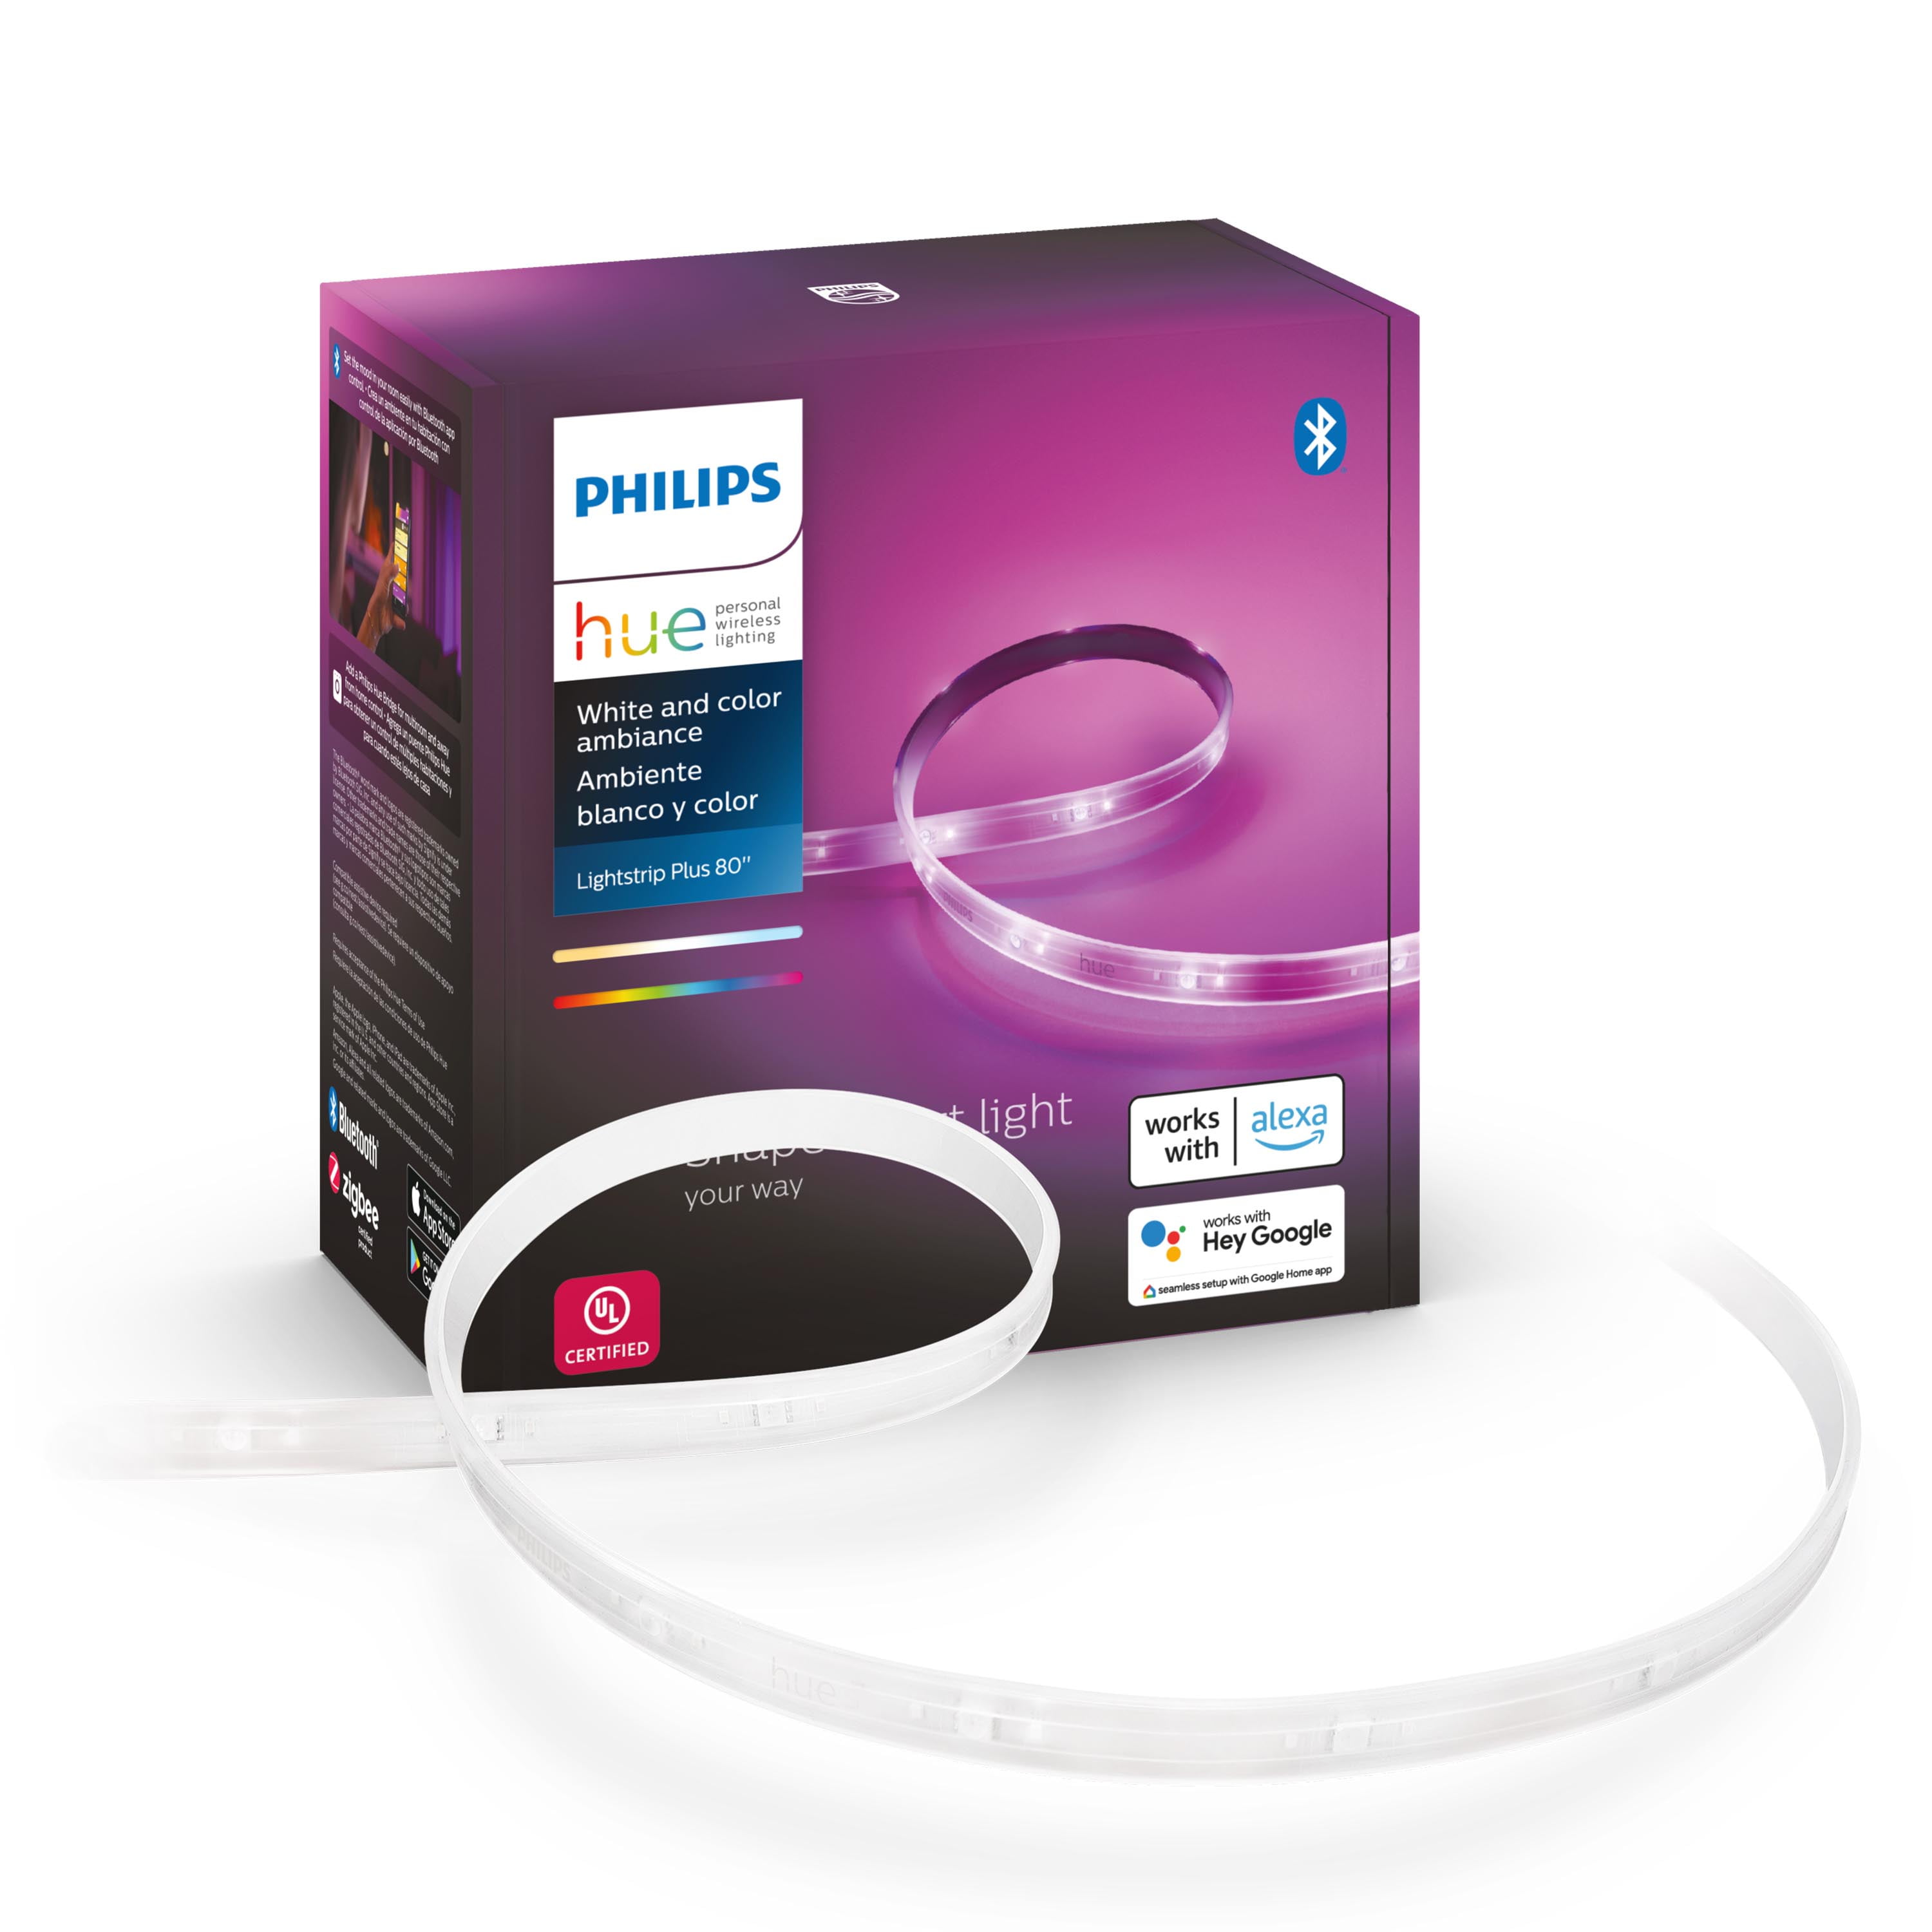 Philips Hue 6.7 Ft. Gradient White & Color Ambiance Lightstrip